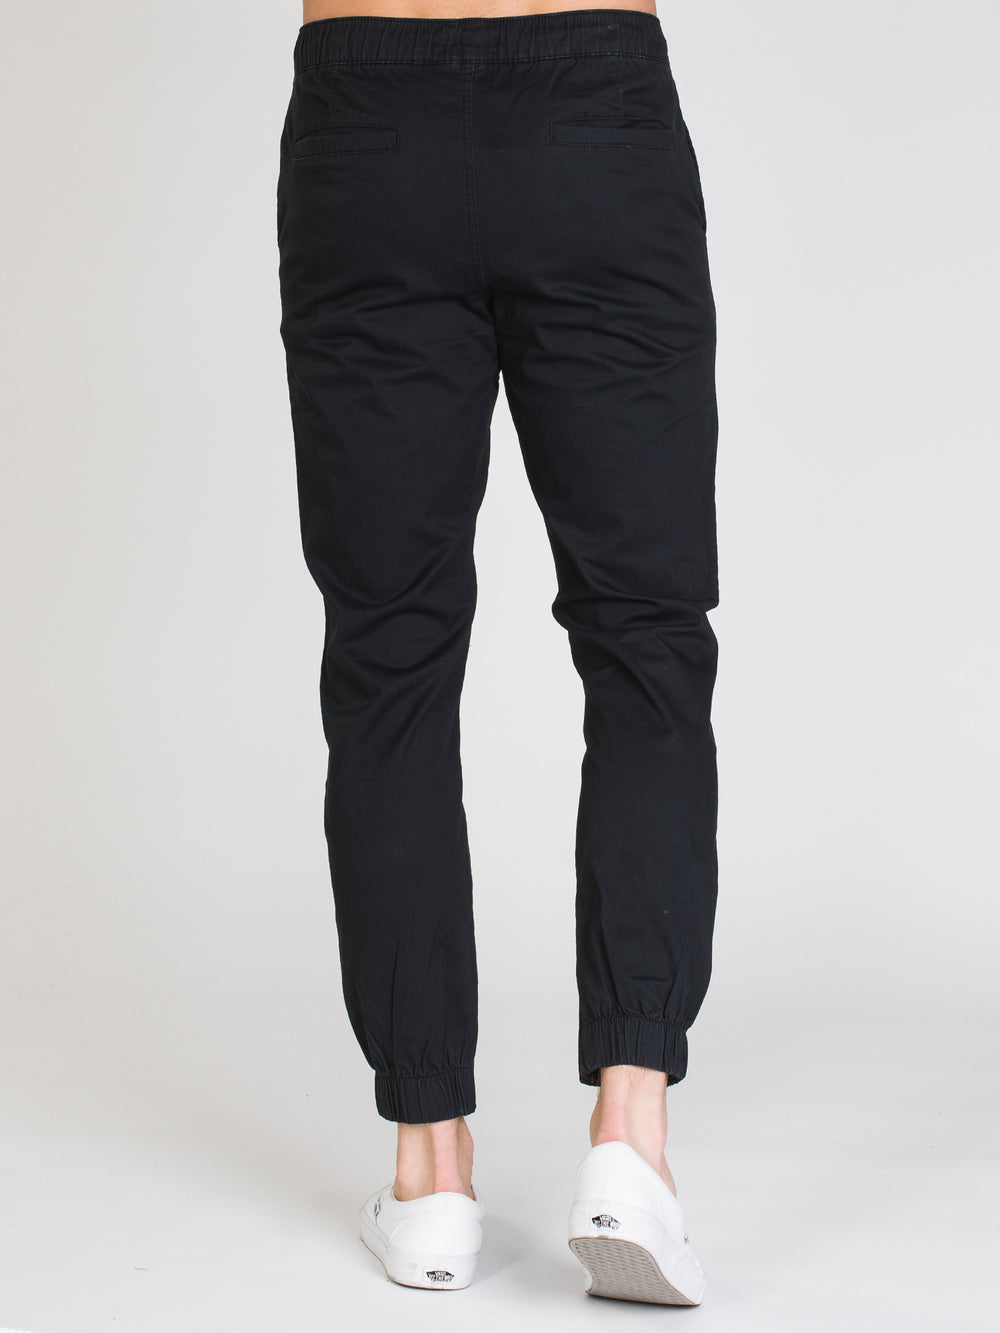 TAINTED CROCKETT RUGBY JOGGER - NAVY - DÉSTOCKAGE